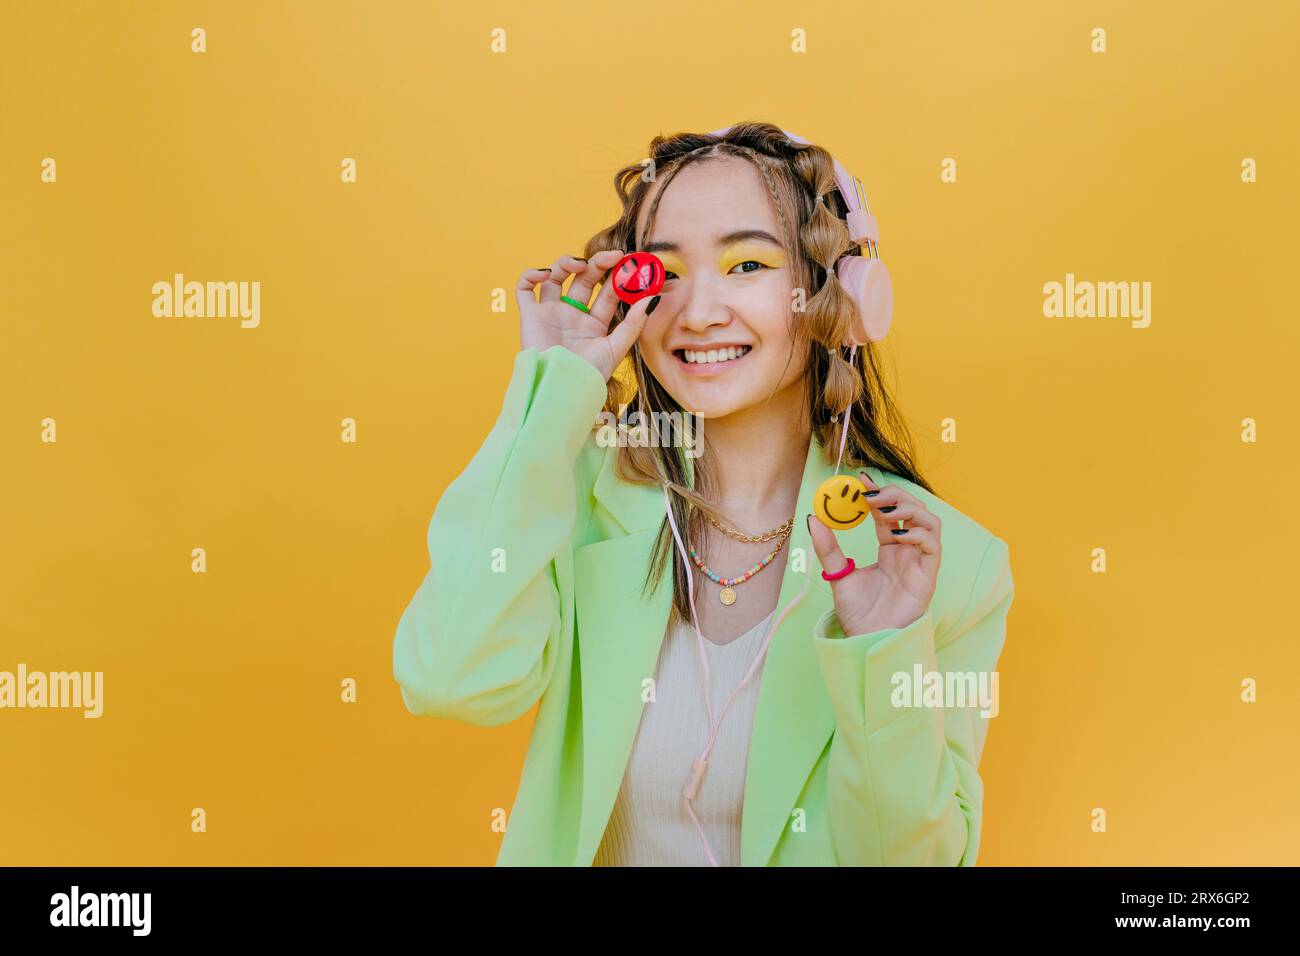 Smiling woman with headphones holding smileys against yellow background Stock Photo